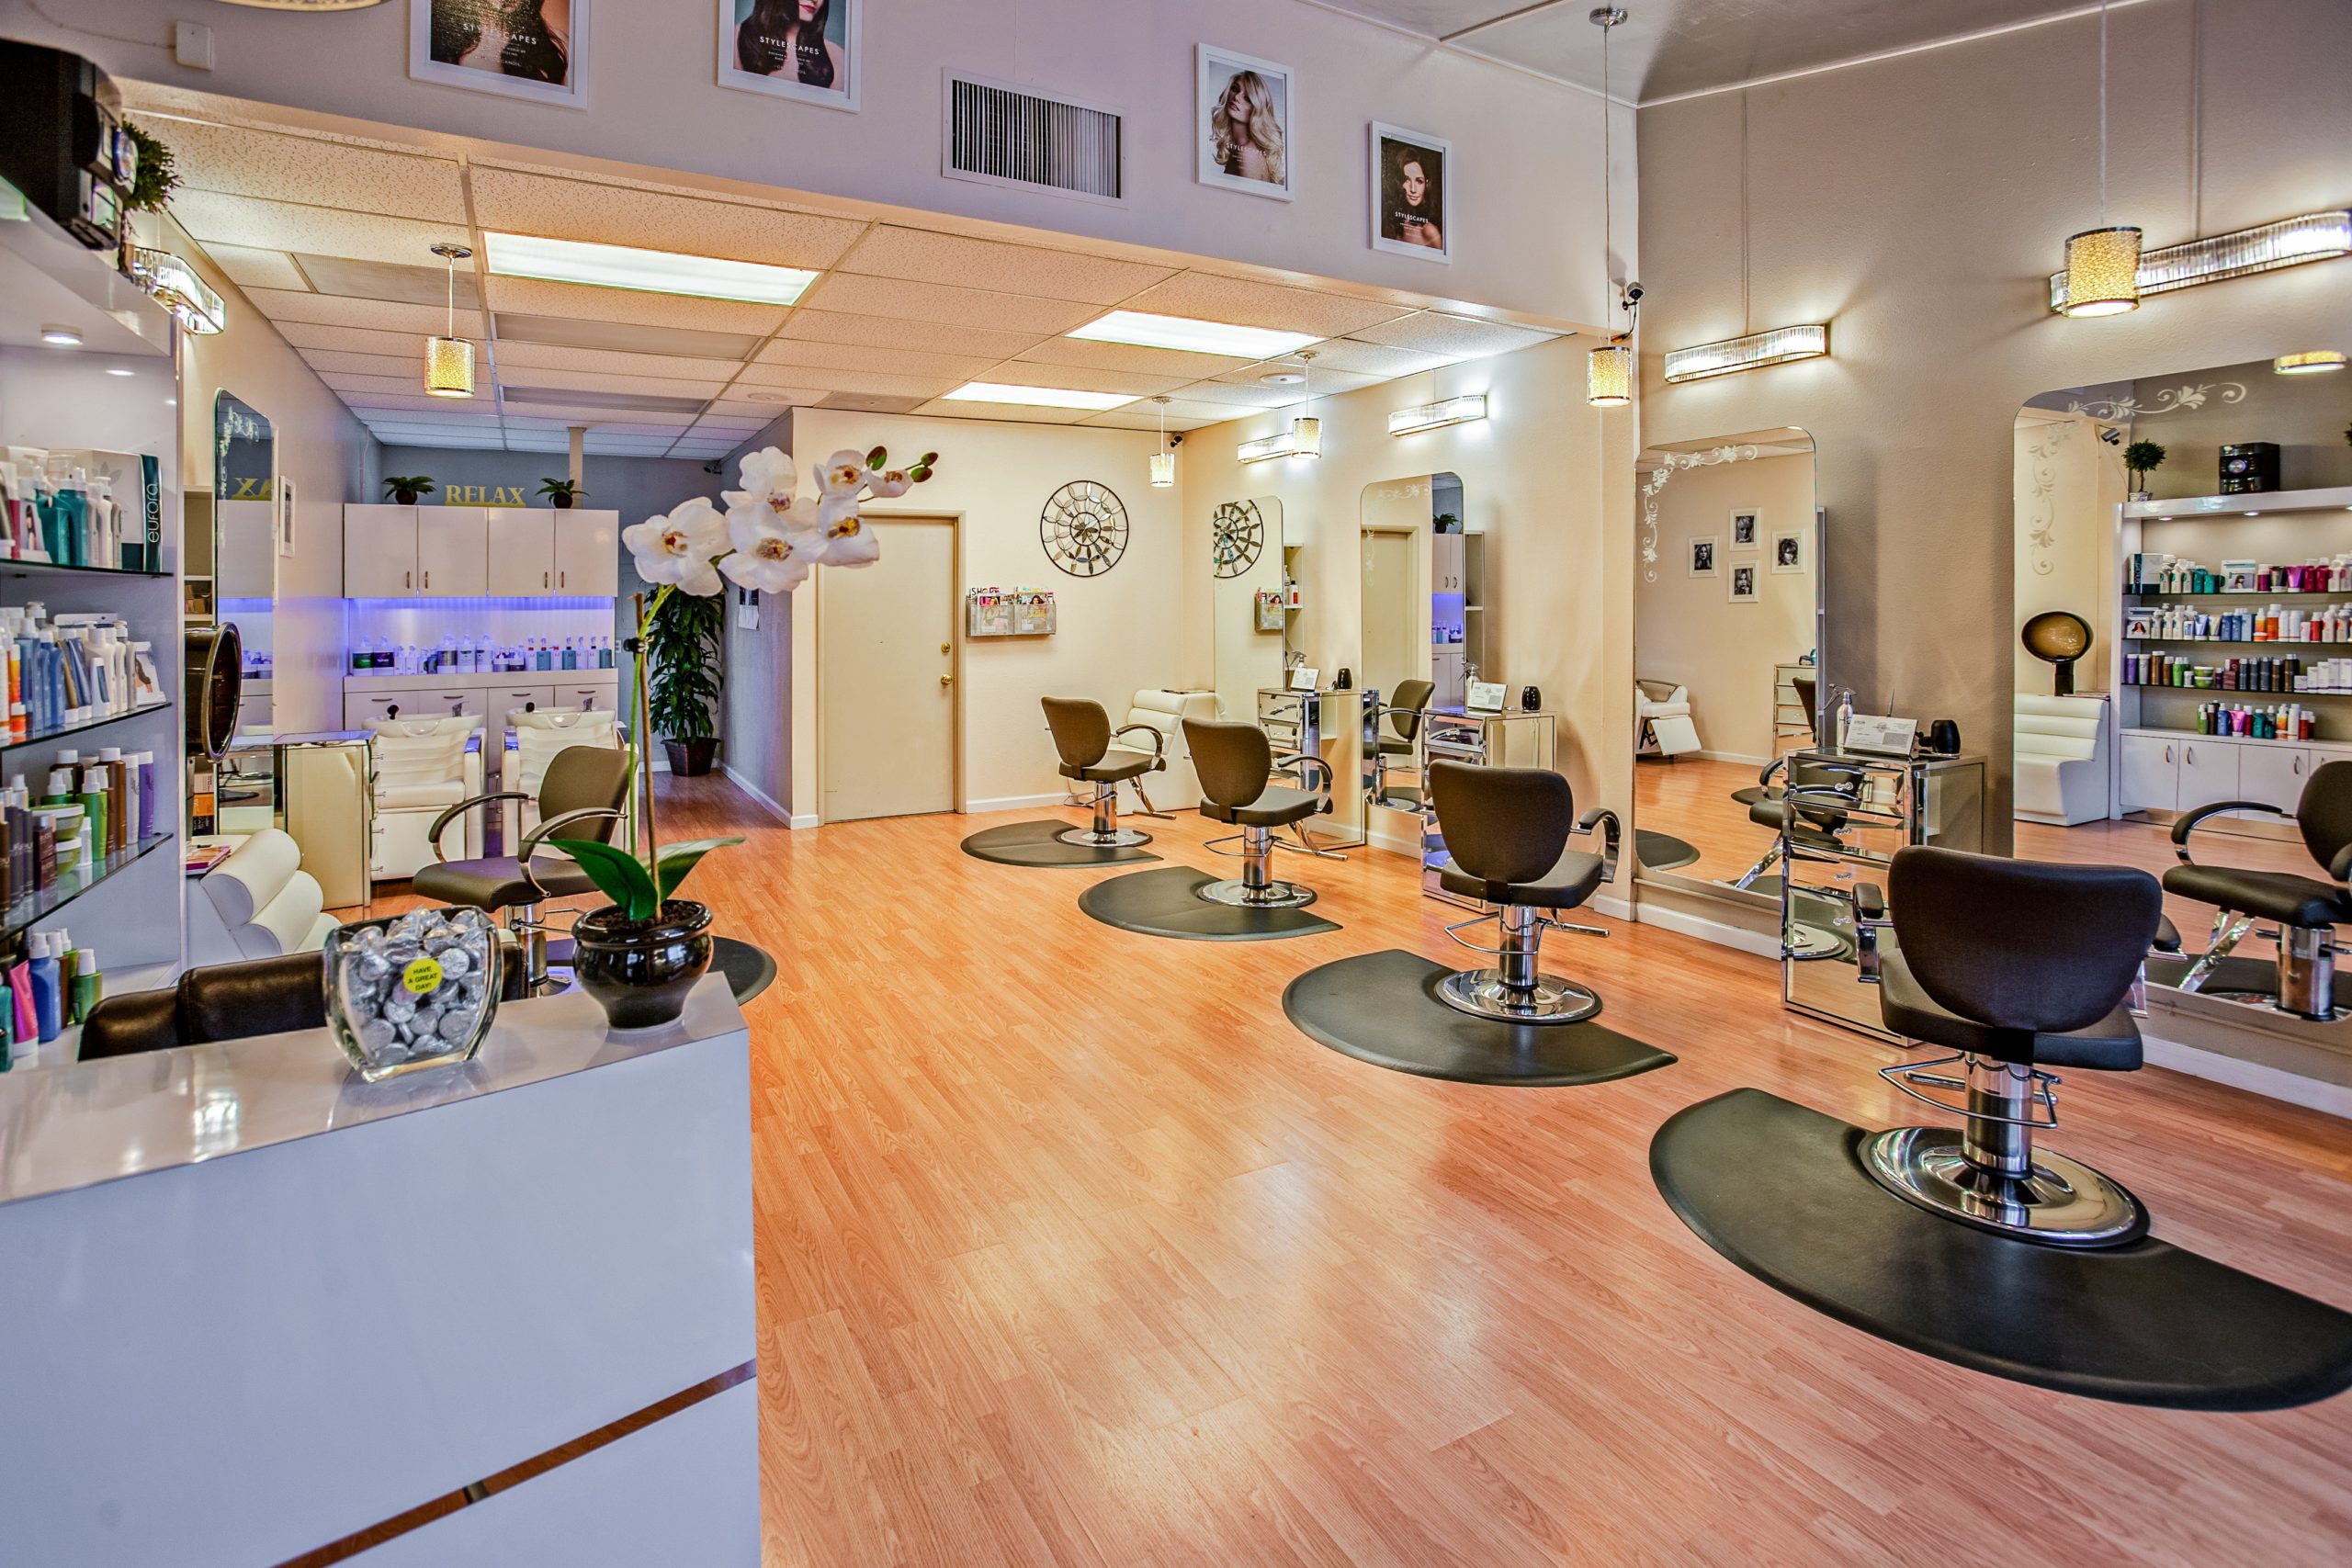 How Does Salon Chair Rental Work in a Salon?